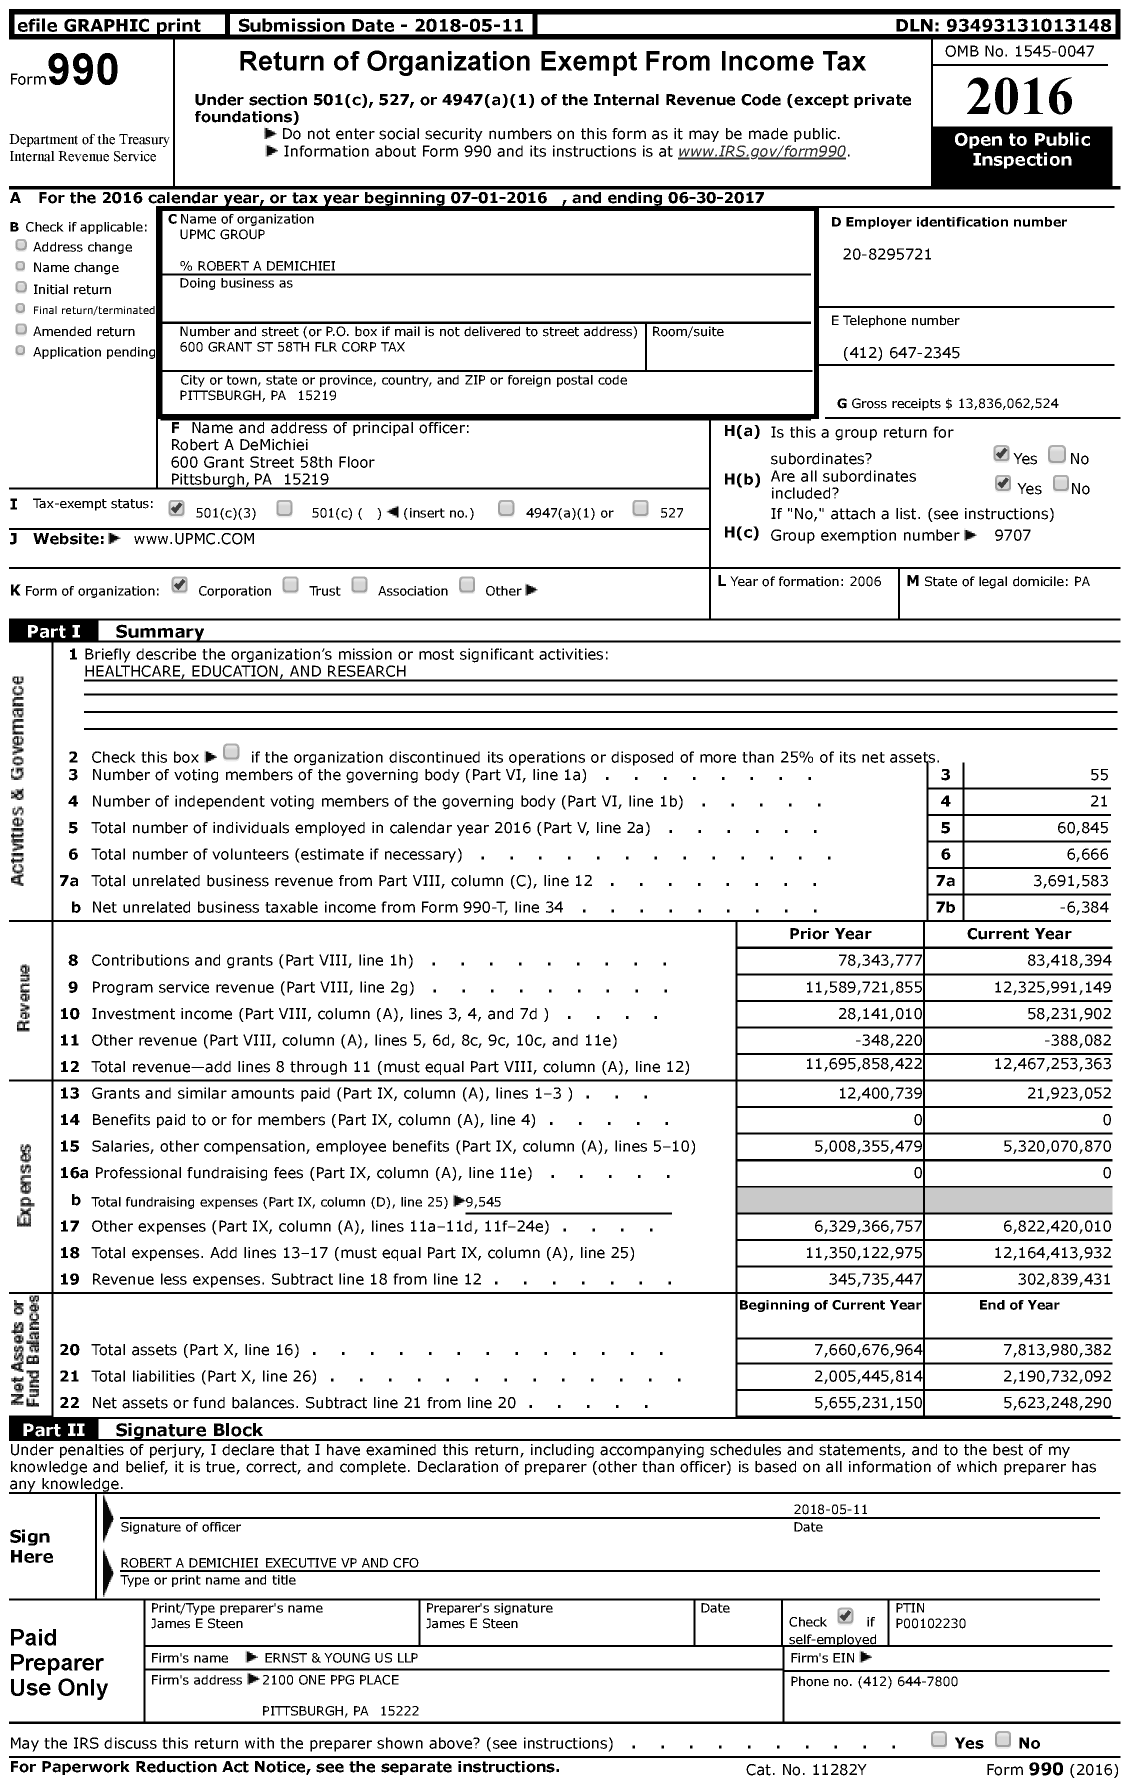 Image of first page of 2016 Form 990 for Upmc Group